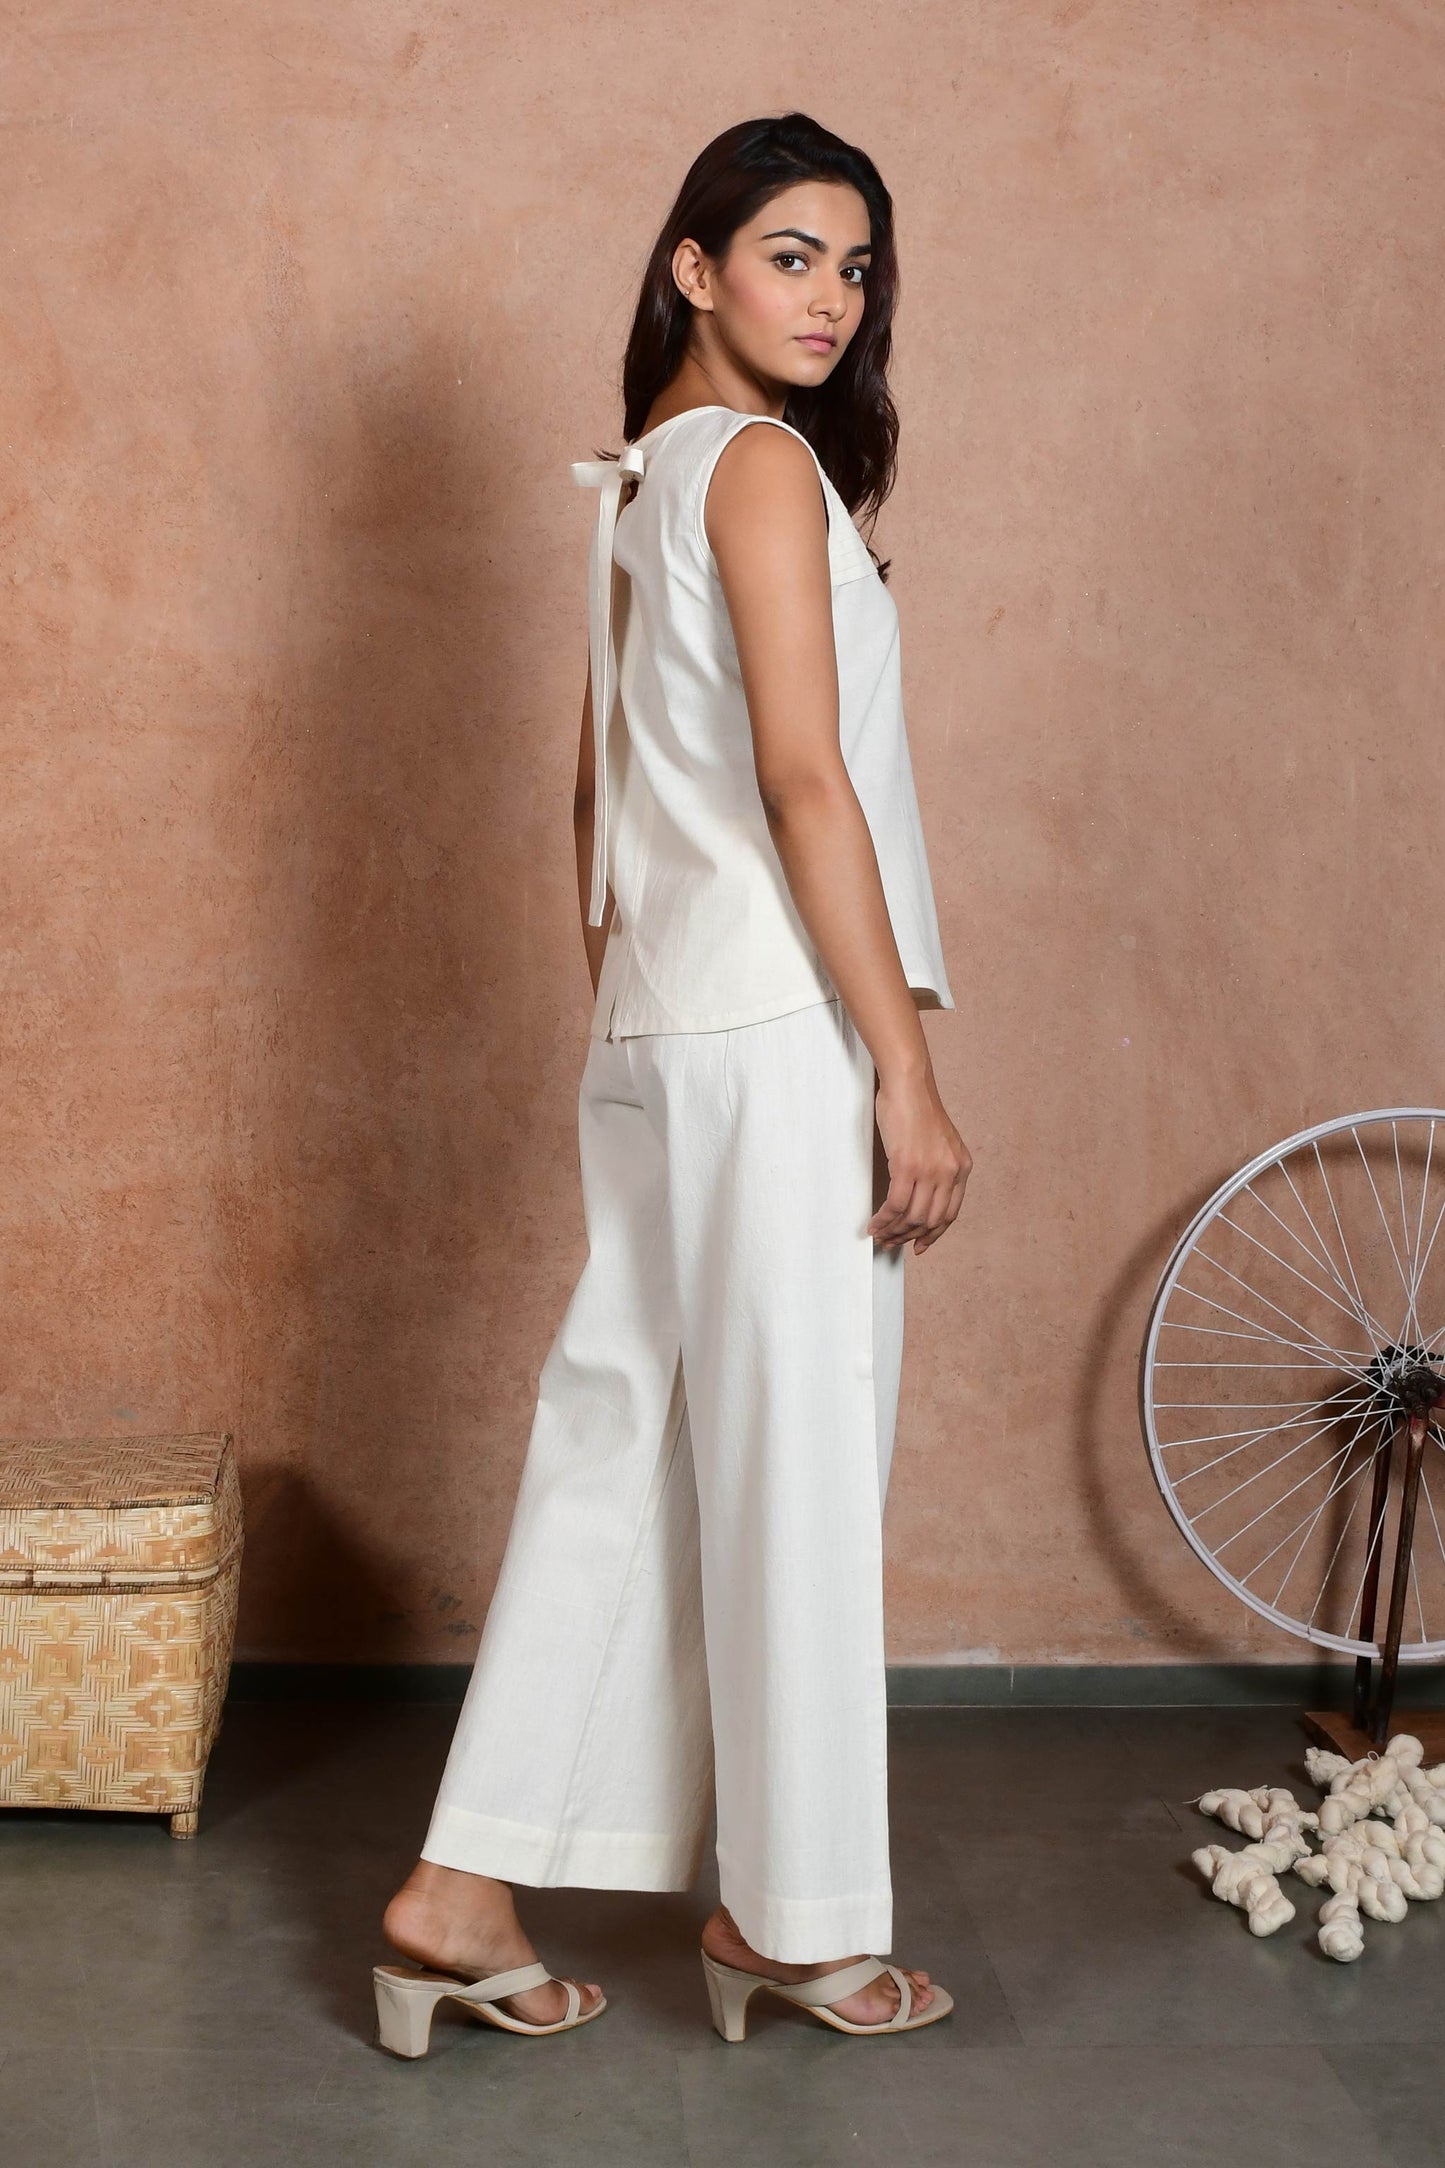 A young Indian model looking back posing wearing off white sleeveless pleated top at front with a bit of bow at the neck showing and straight pants.